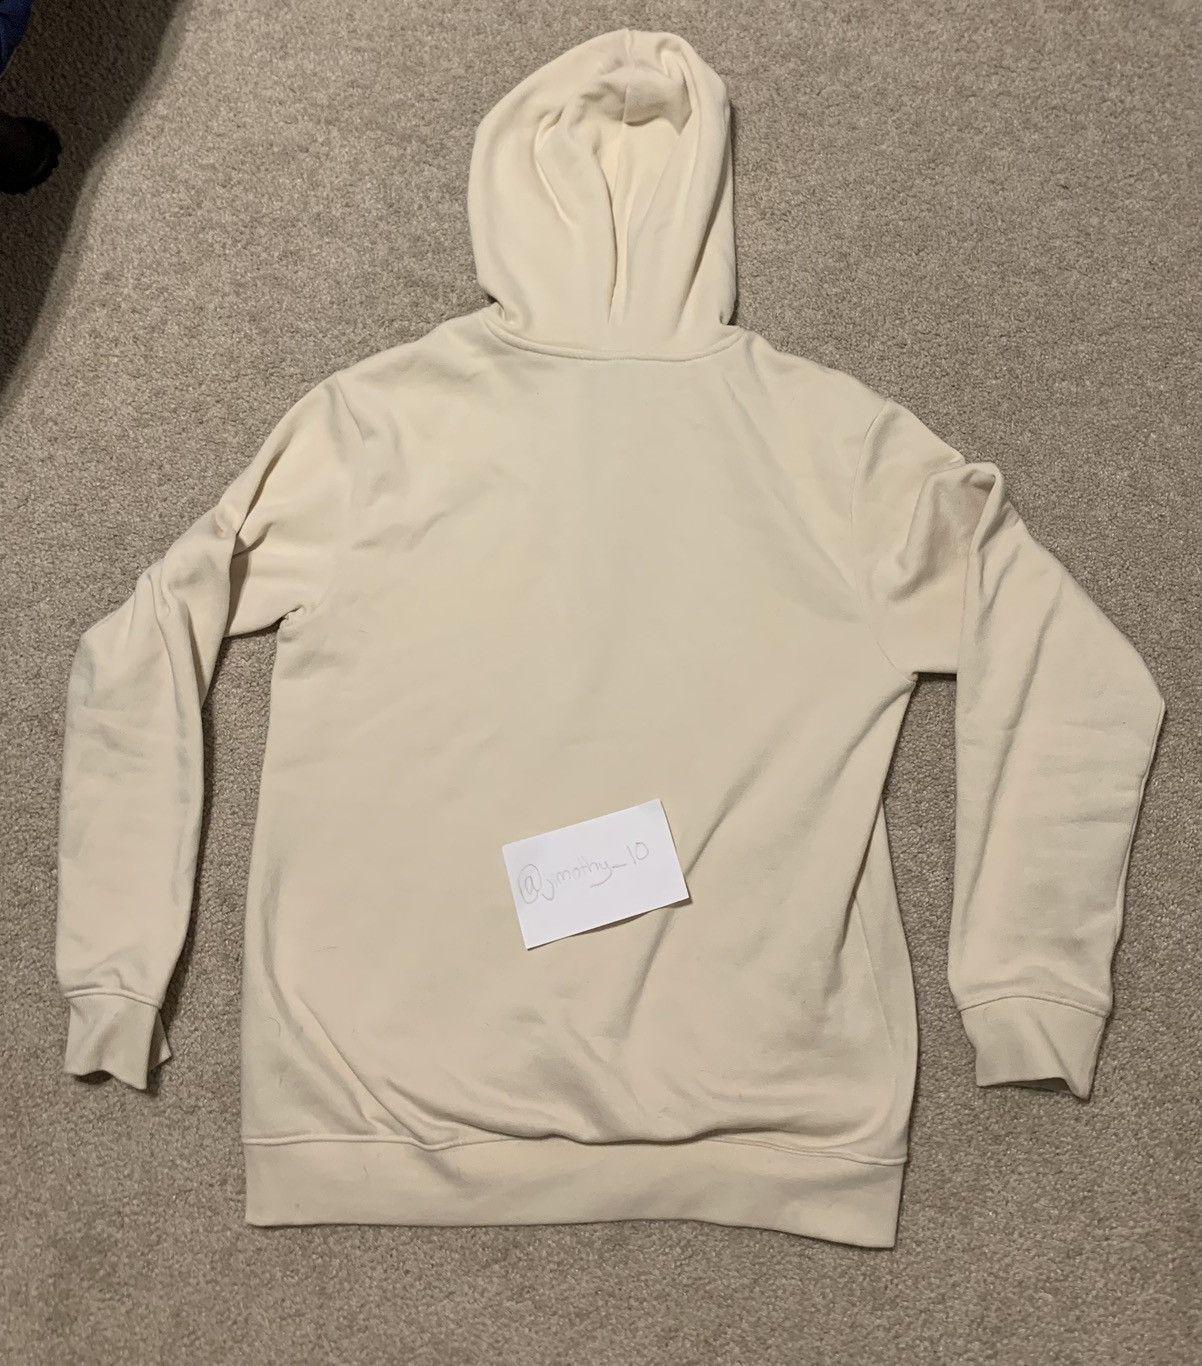 H&M H&M 'NY83' Hoodie Size US M / EU 48-50 / 2 - 2 Preview